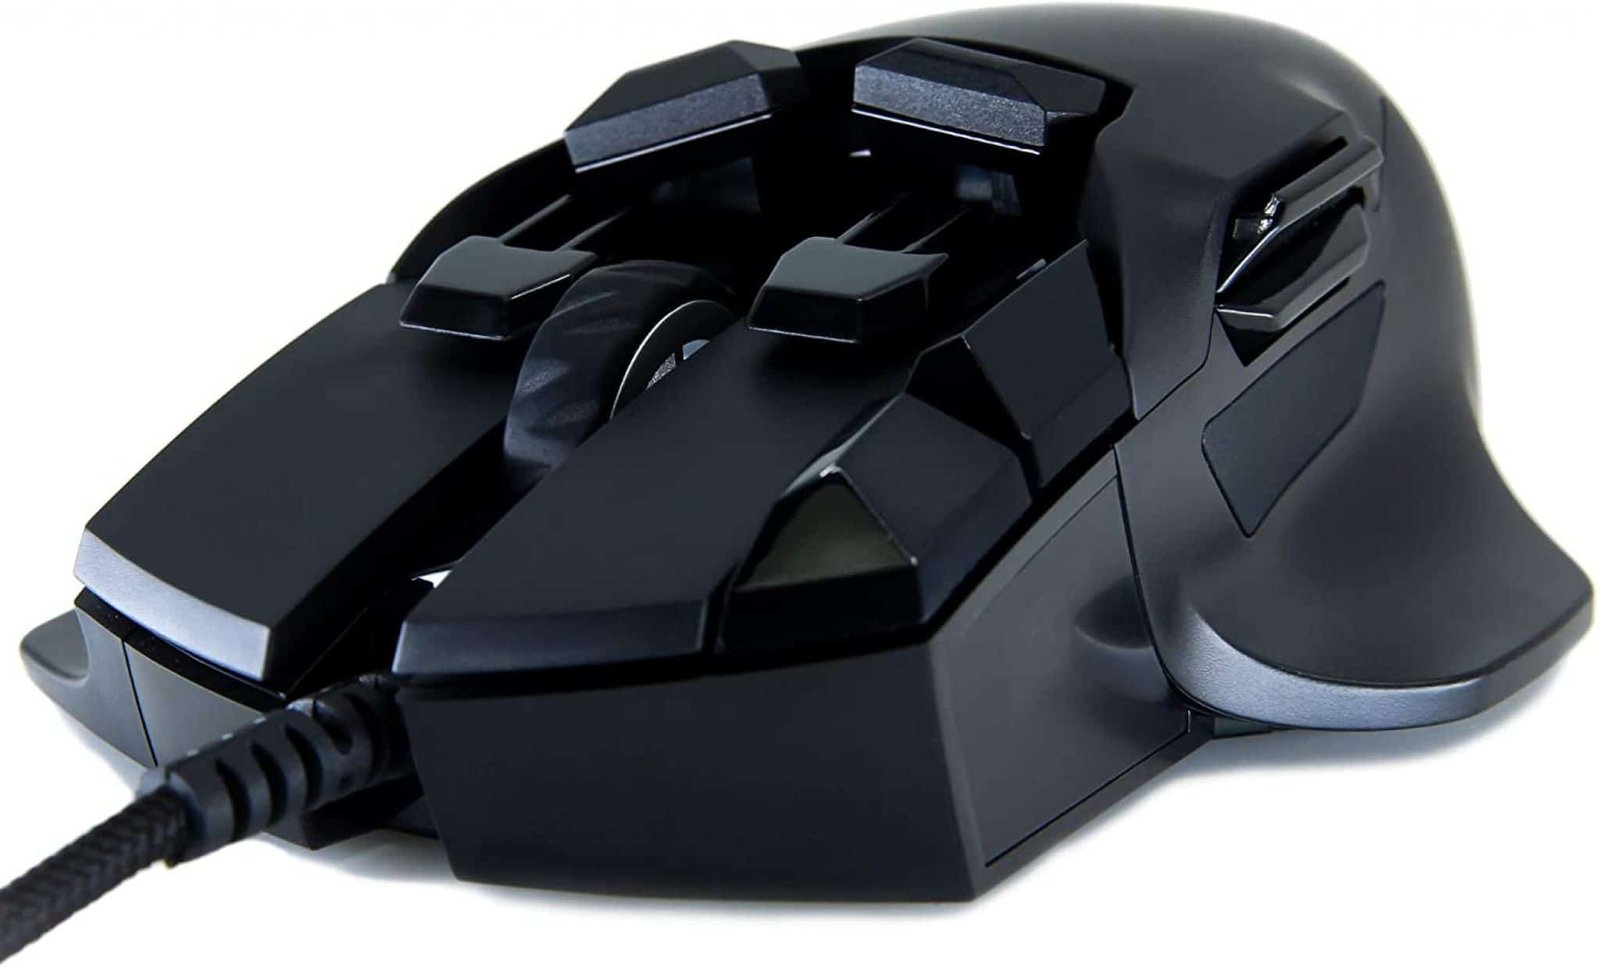 13 Best MMO Gaming Mouse for The Lead 2023 GPCD